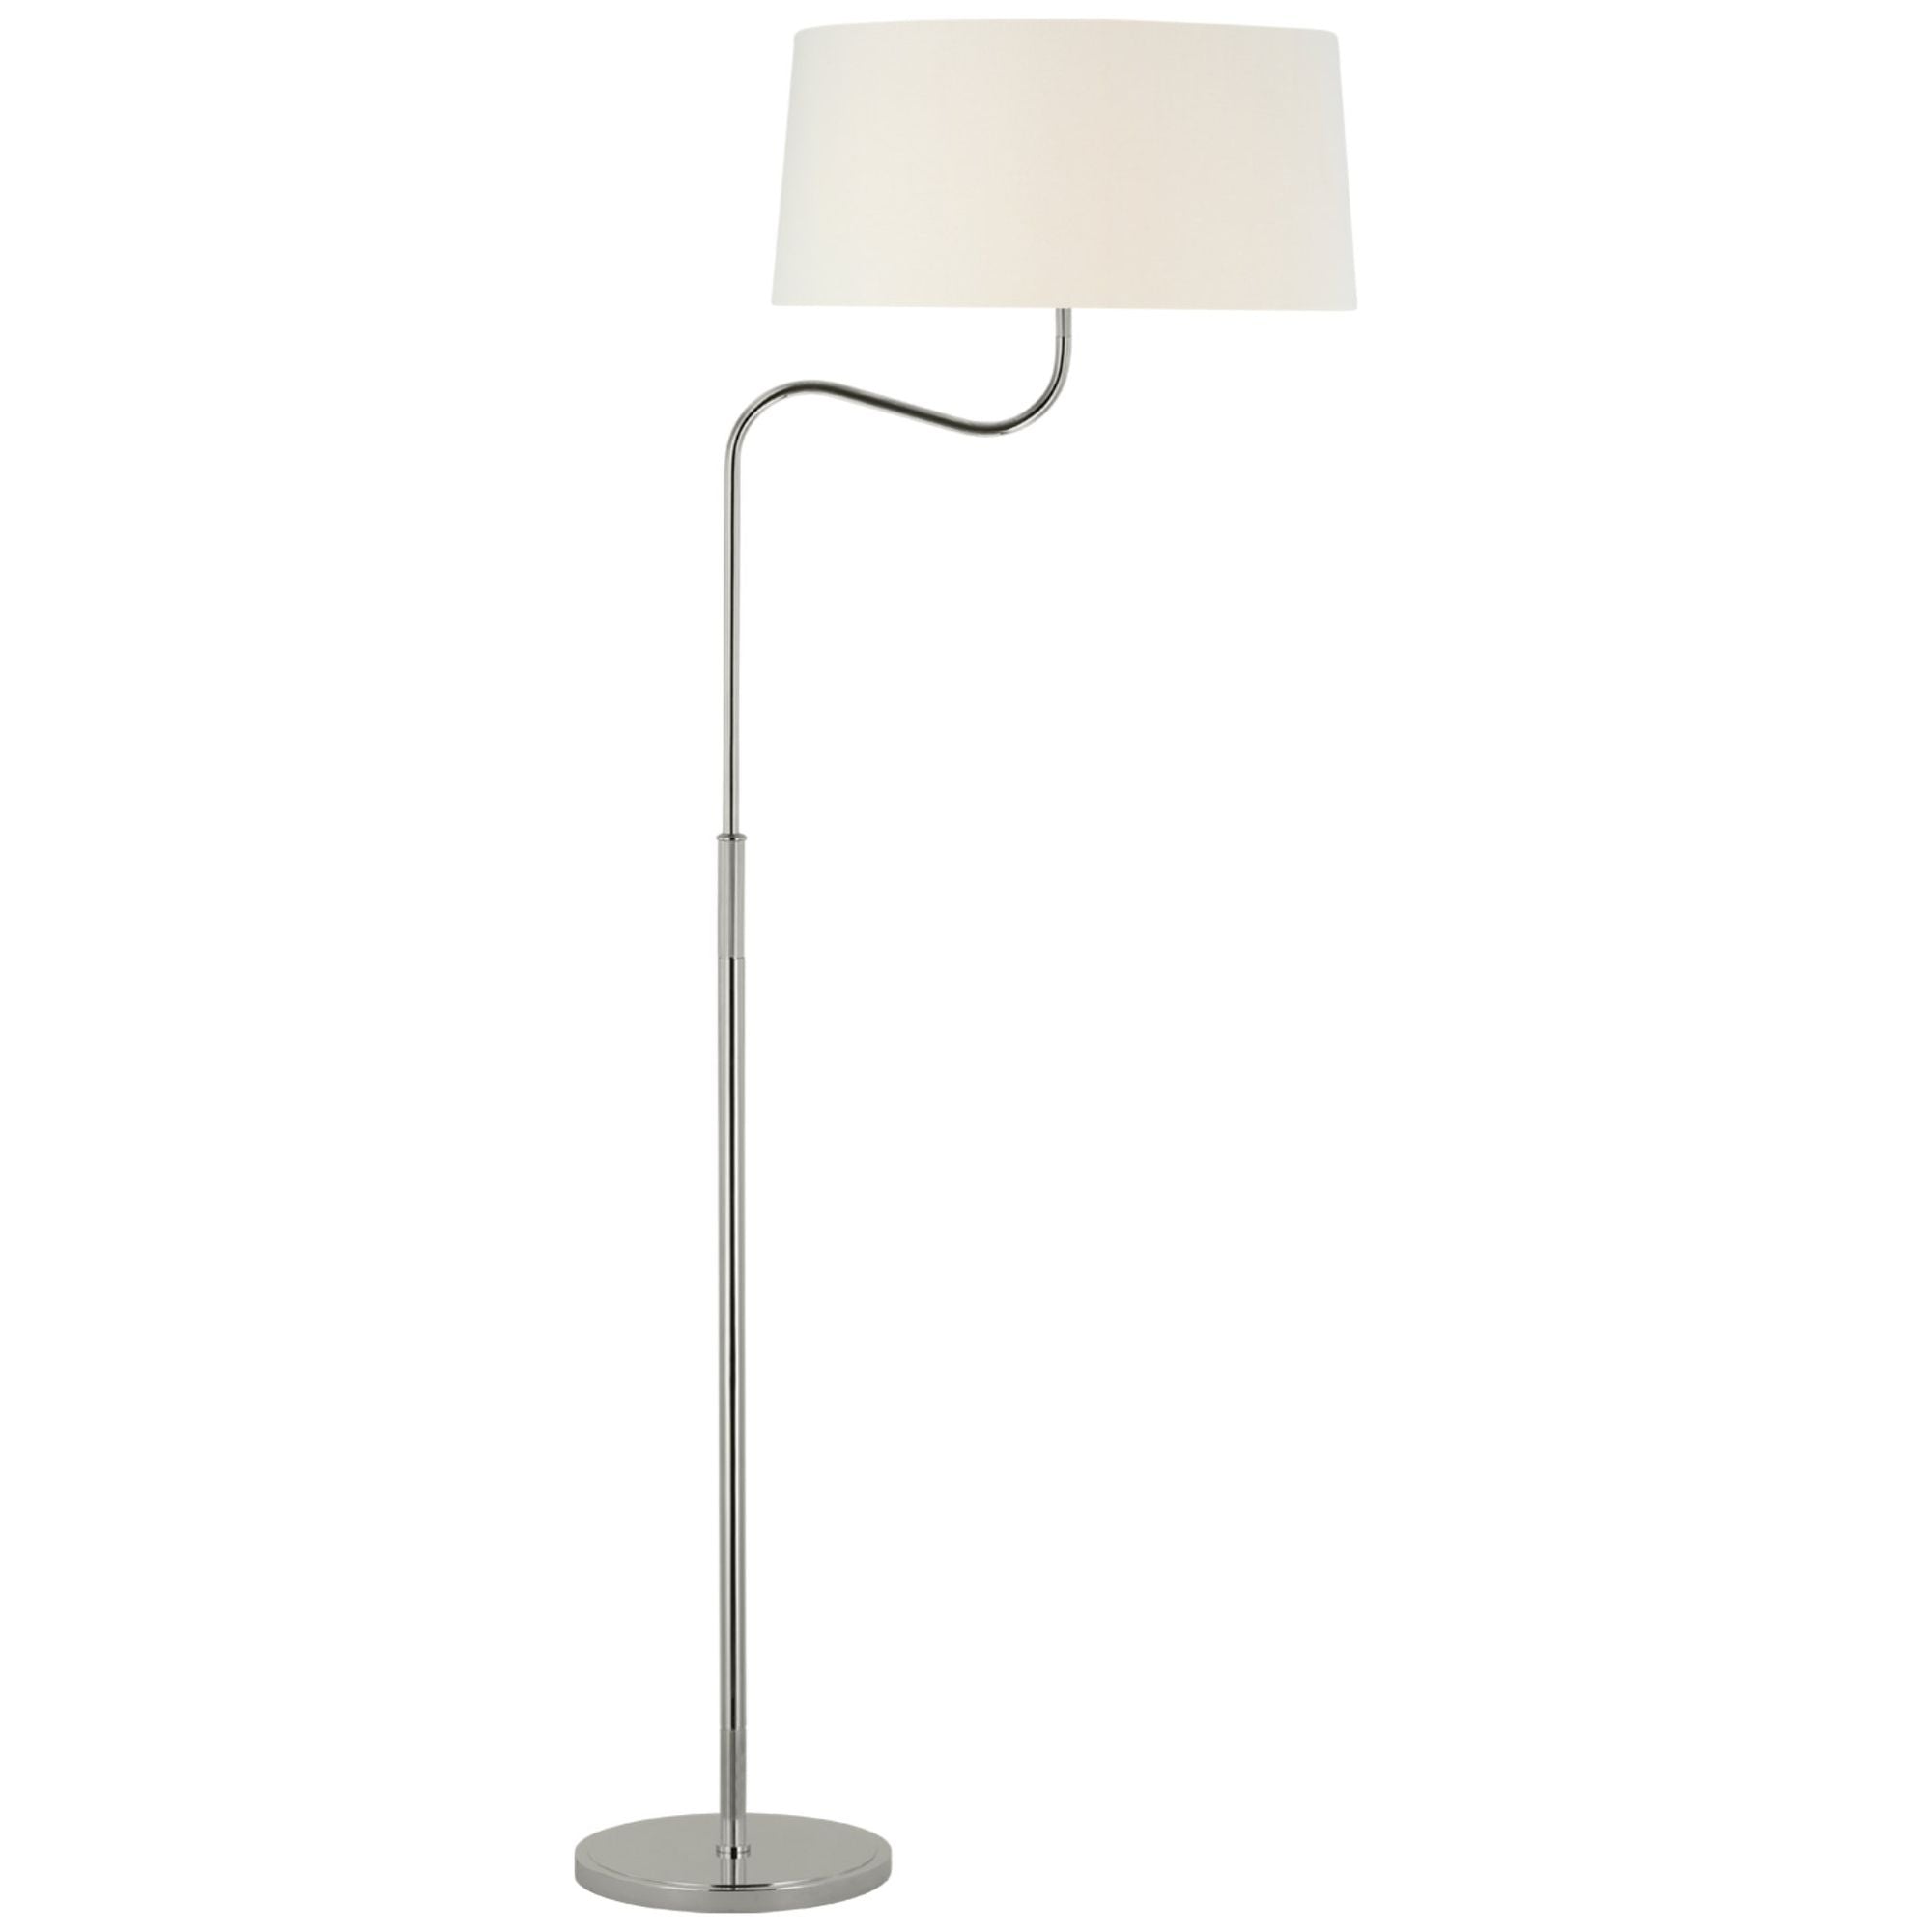 Thomas O'Brien Canto Large Adjustable Floor Lamp in Polished Nickel with Linen Shade